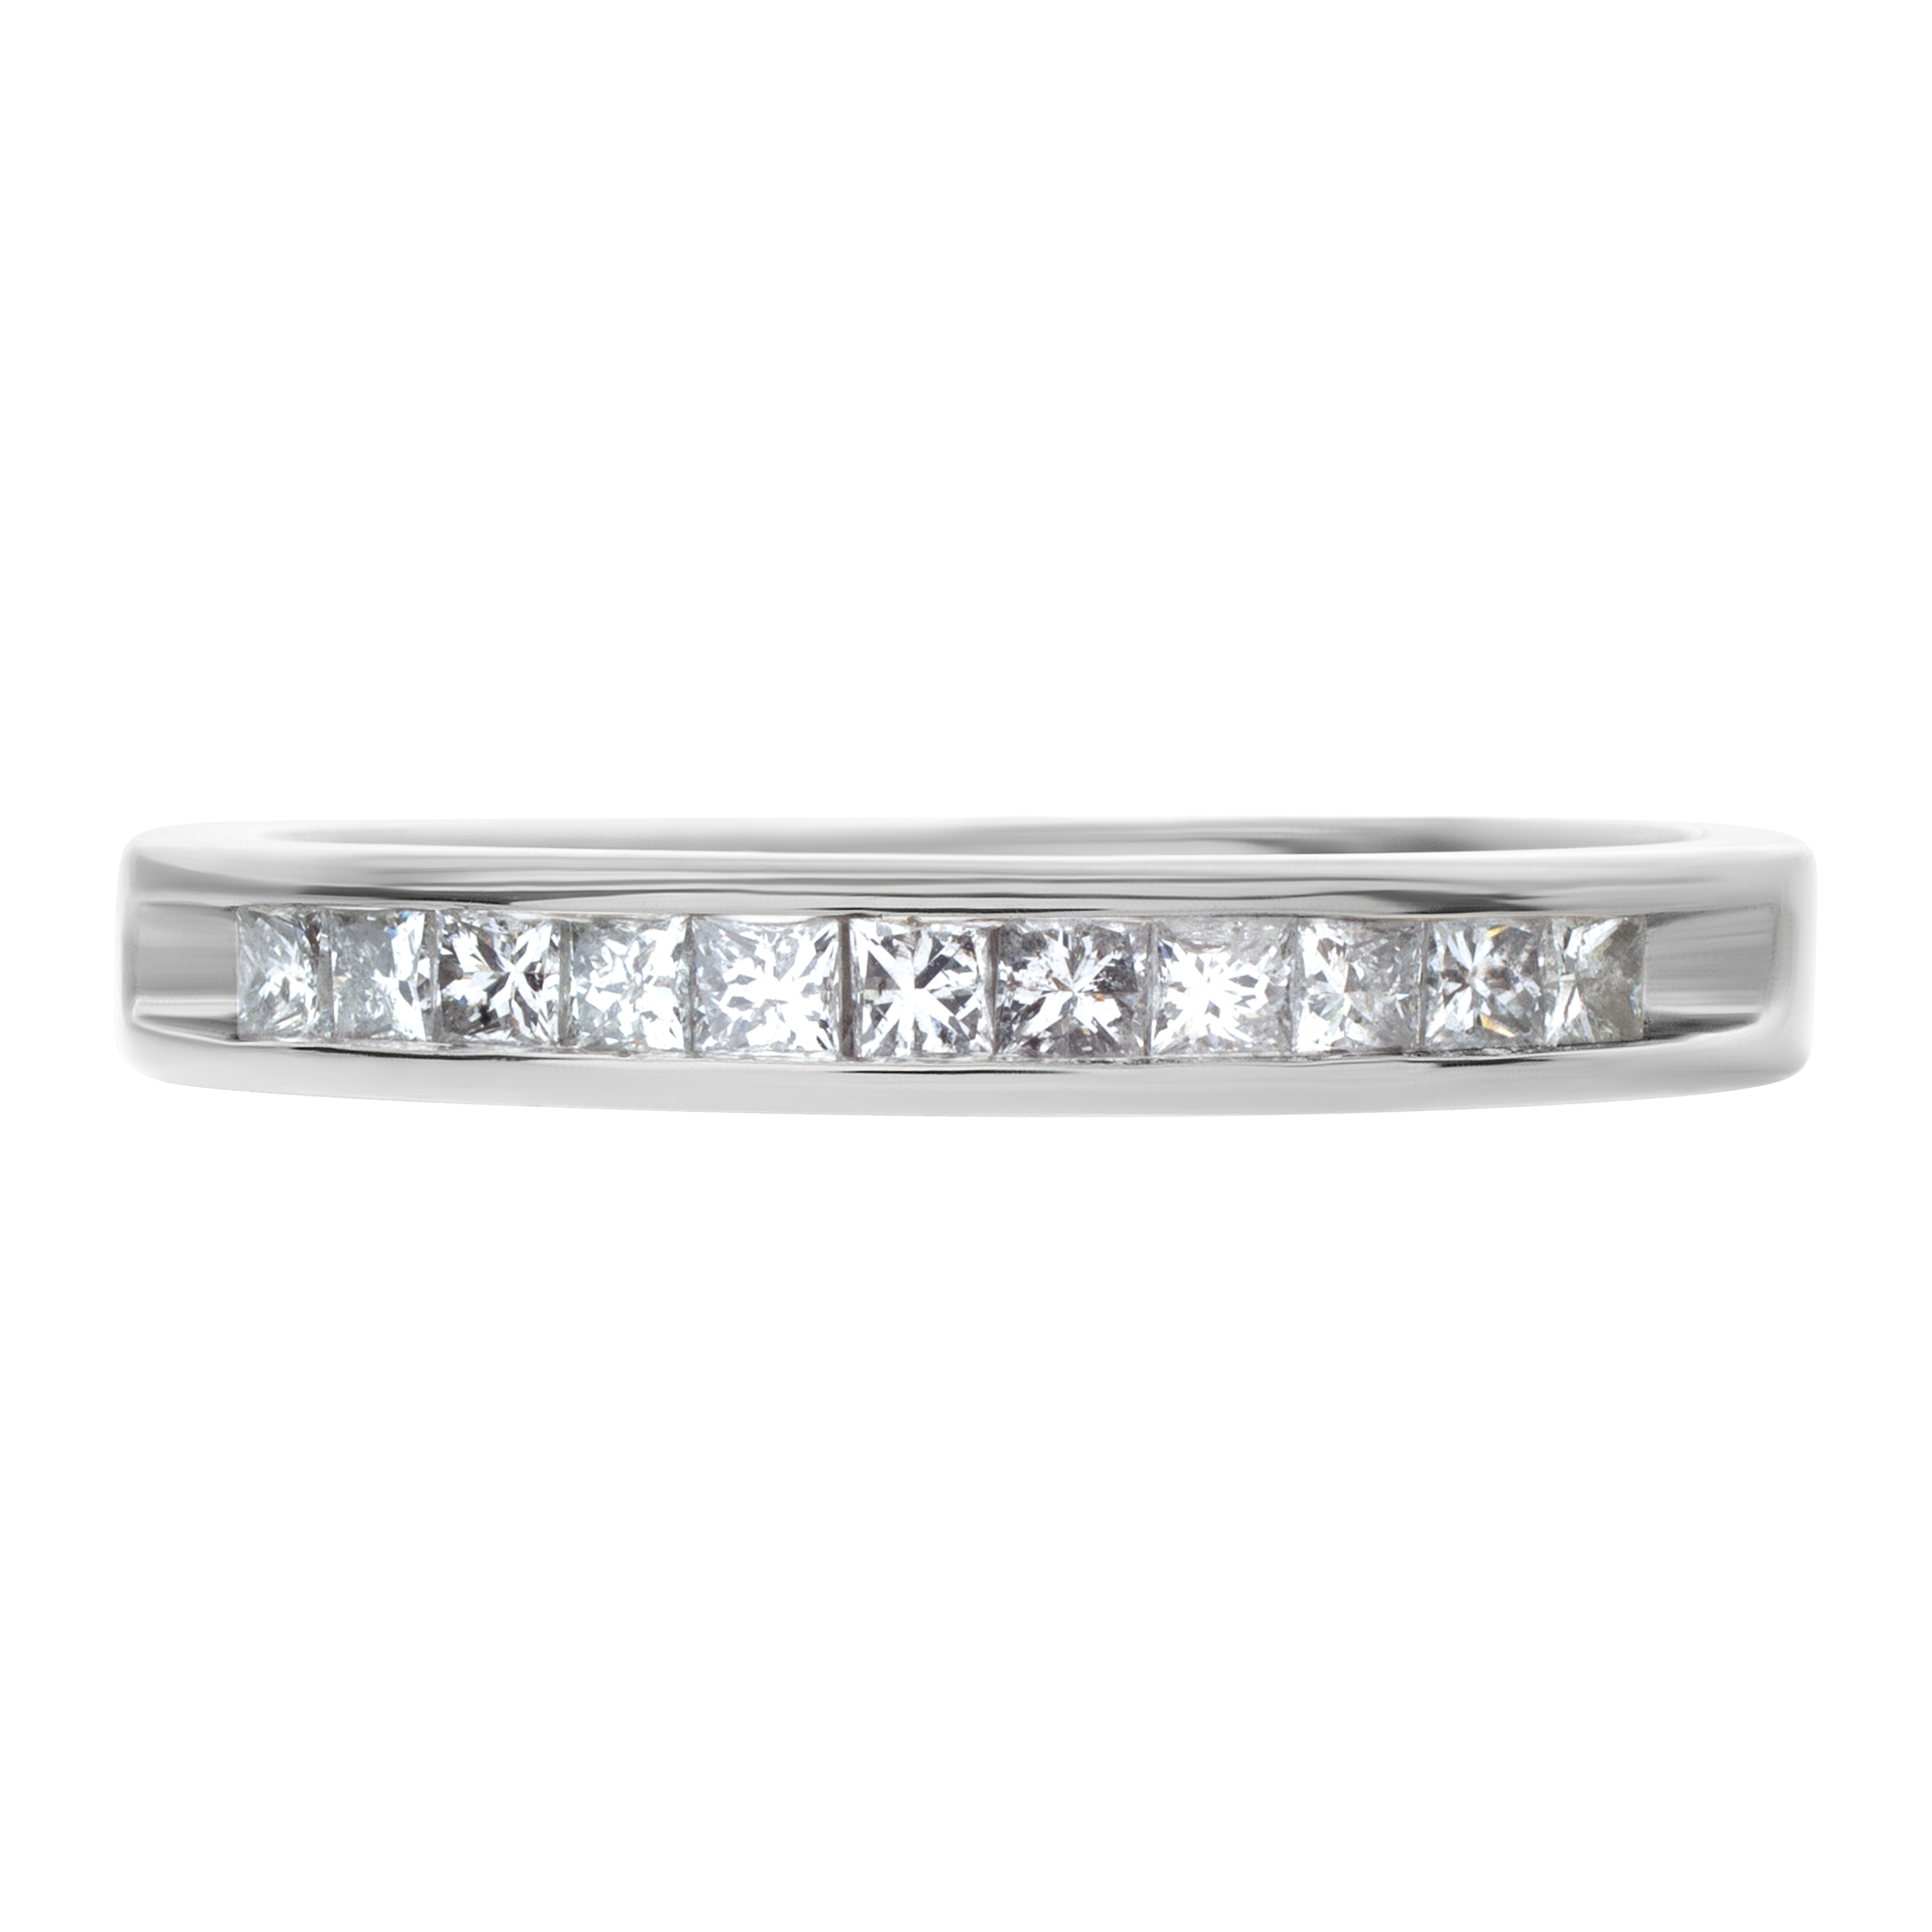 Semi Diamond Eternity Band and Ring in 14k white gold. 0.55 carats in diamonds. Size 6.25 image 2